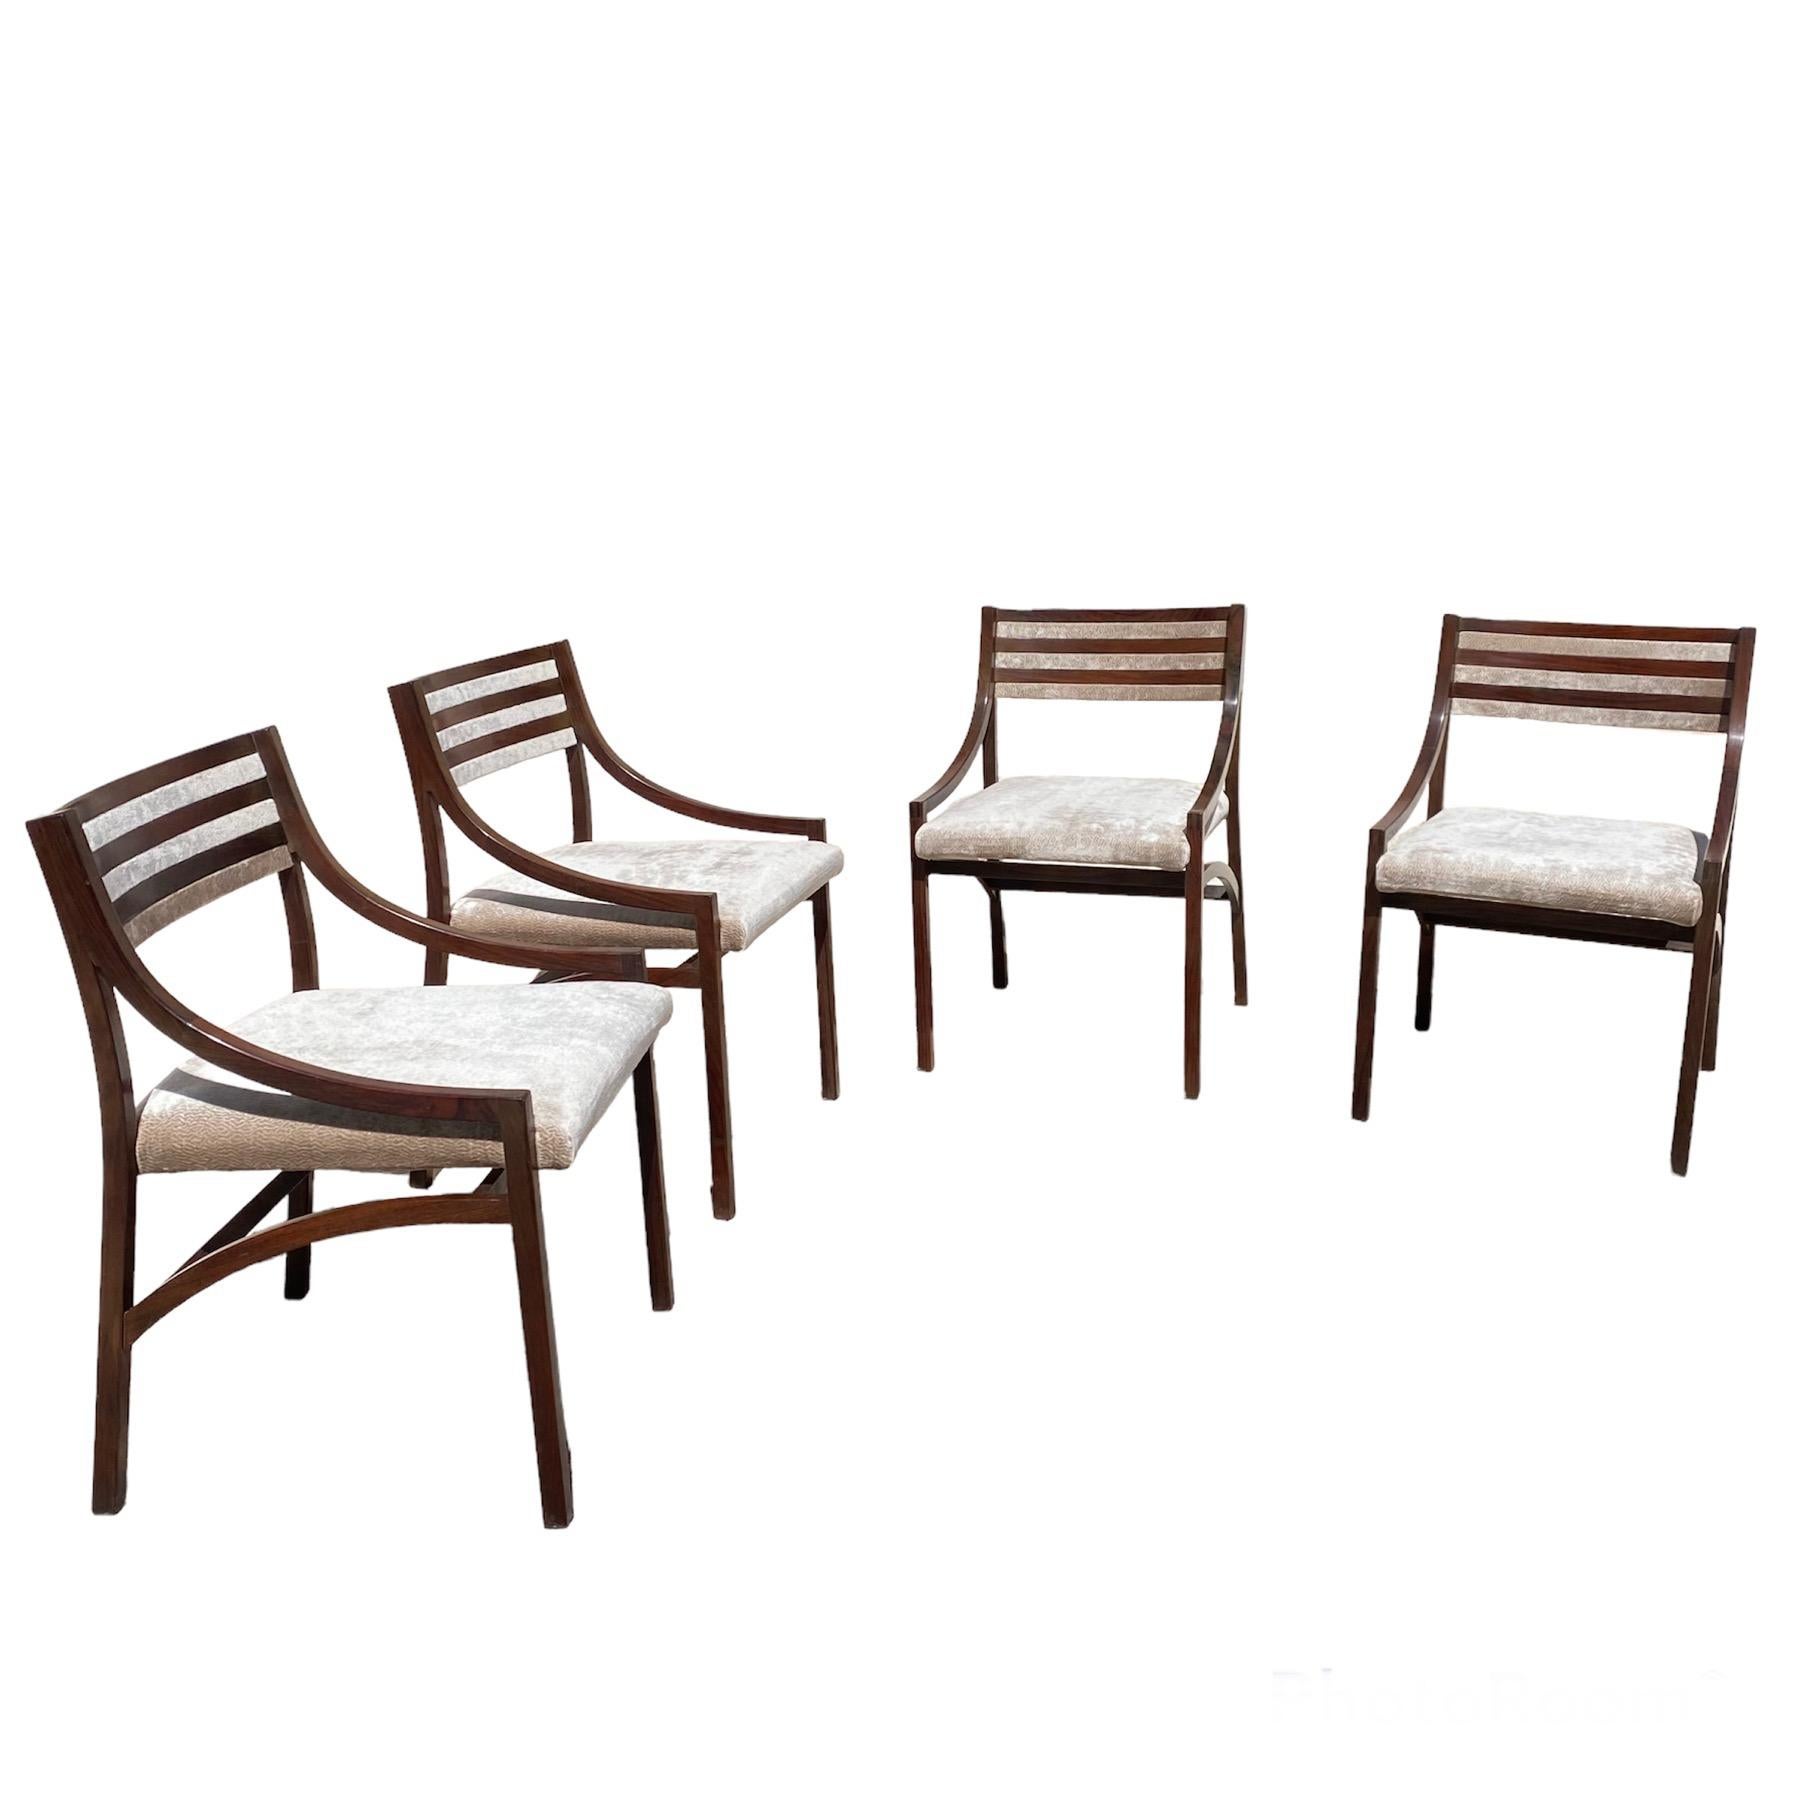 Set of 4 chairs model 110 designed by Ico Parisi for Cassina, Italy 1961's. 
 
Set of 4 elegant chairs made by Ico Parisi for Cassina. 
The chairs are in perfect condition, the Rosewood Wood was polished and the seats were reupholstered in a beige